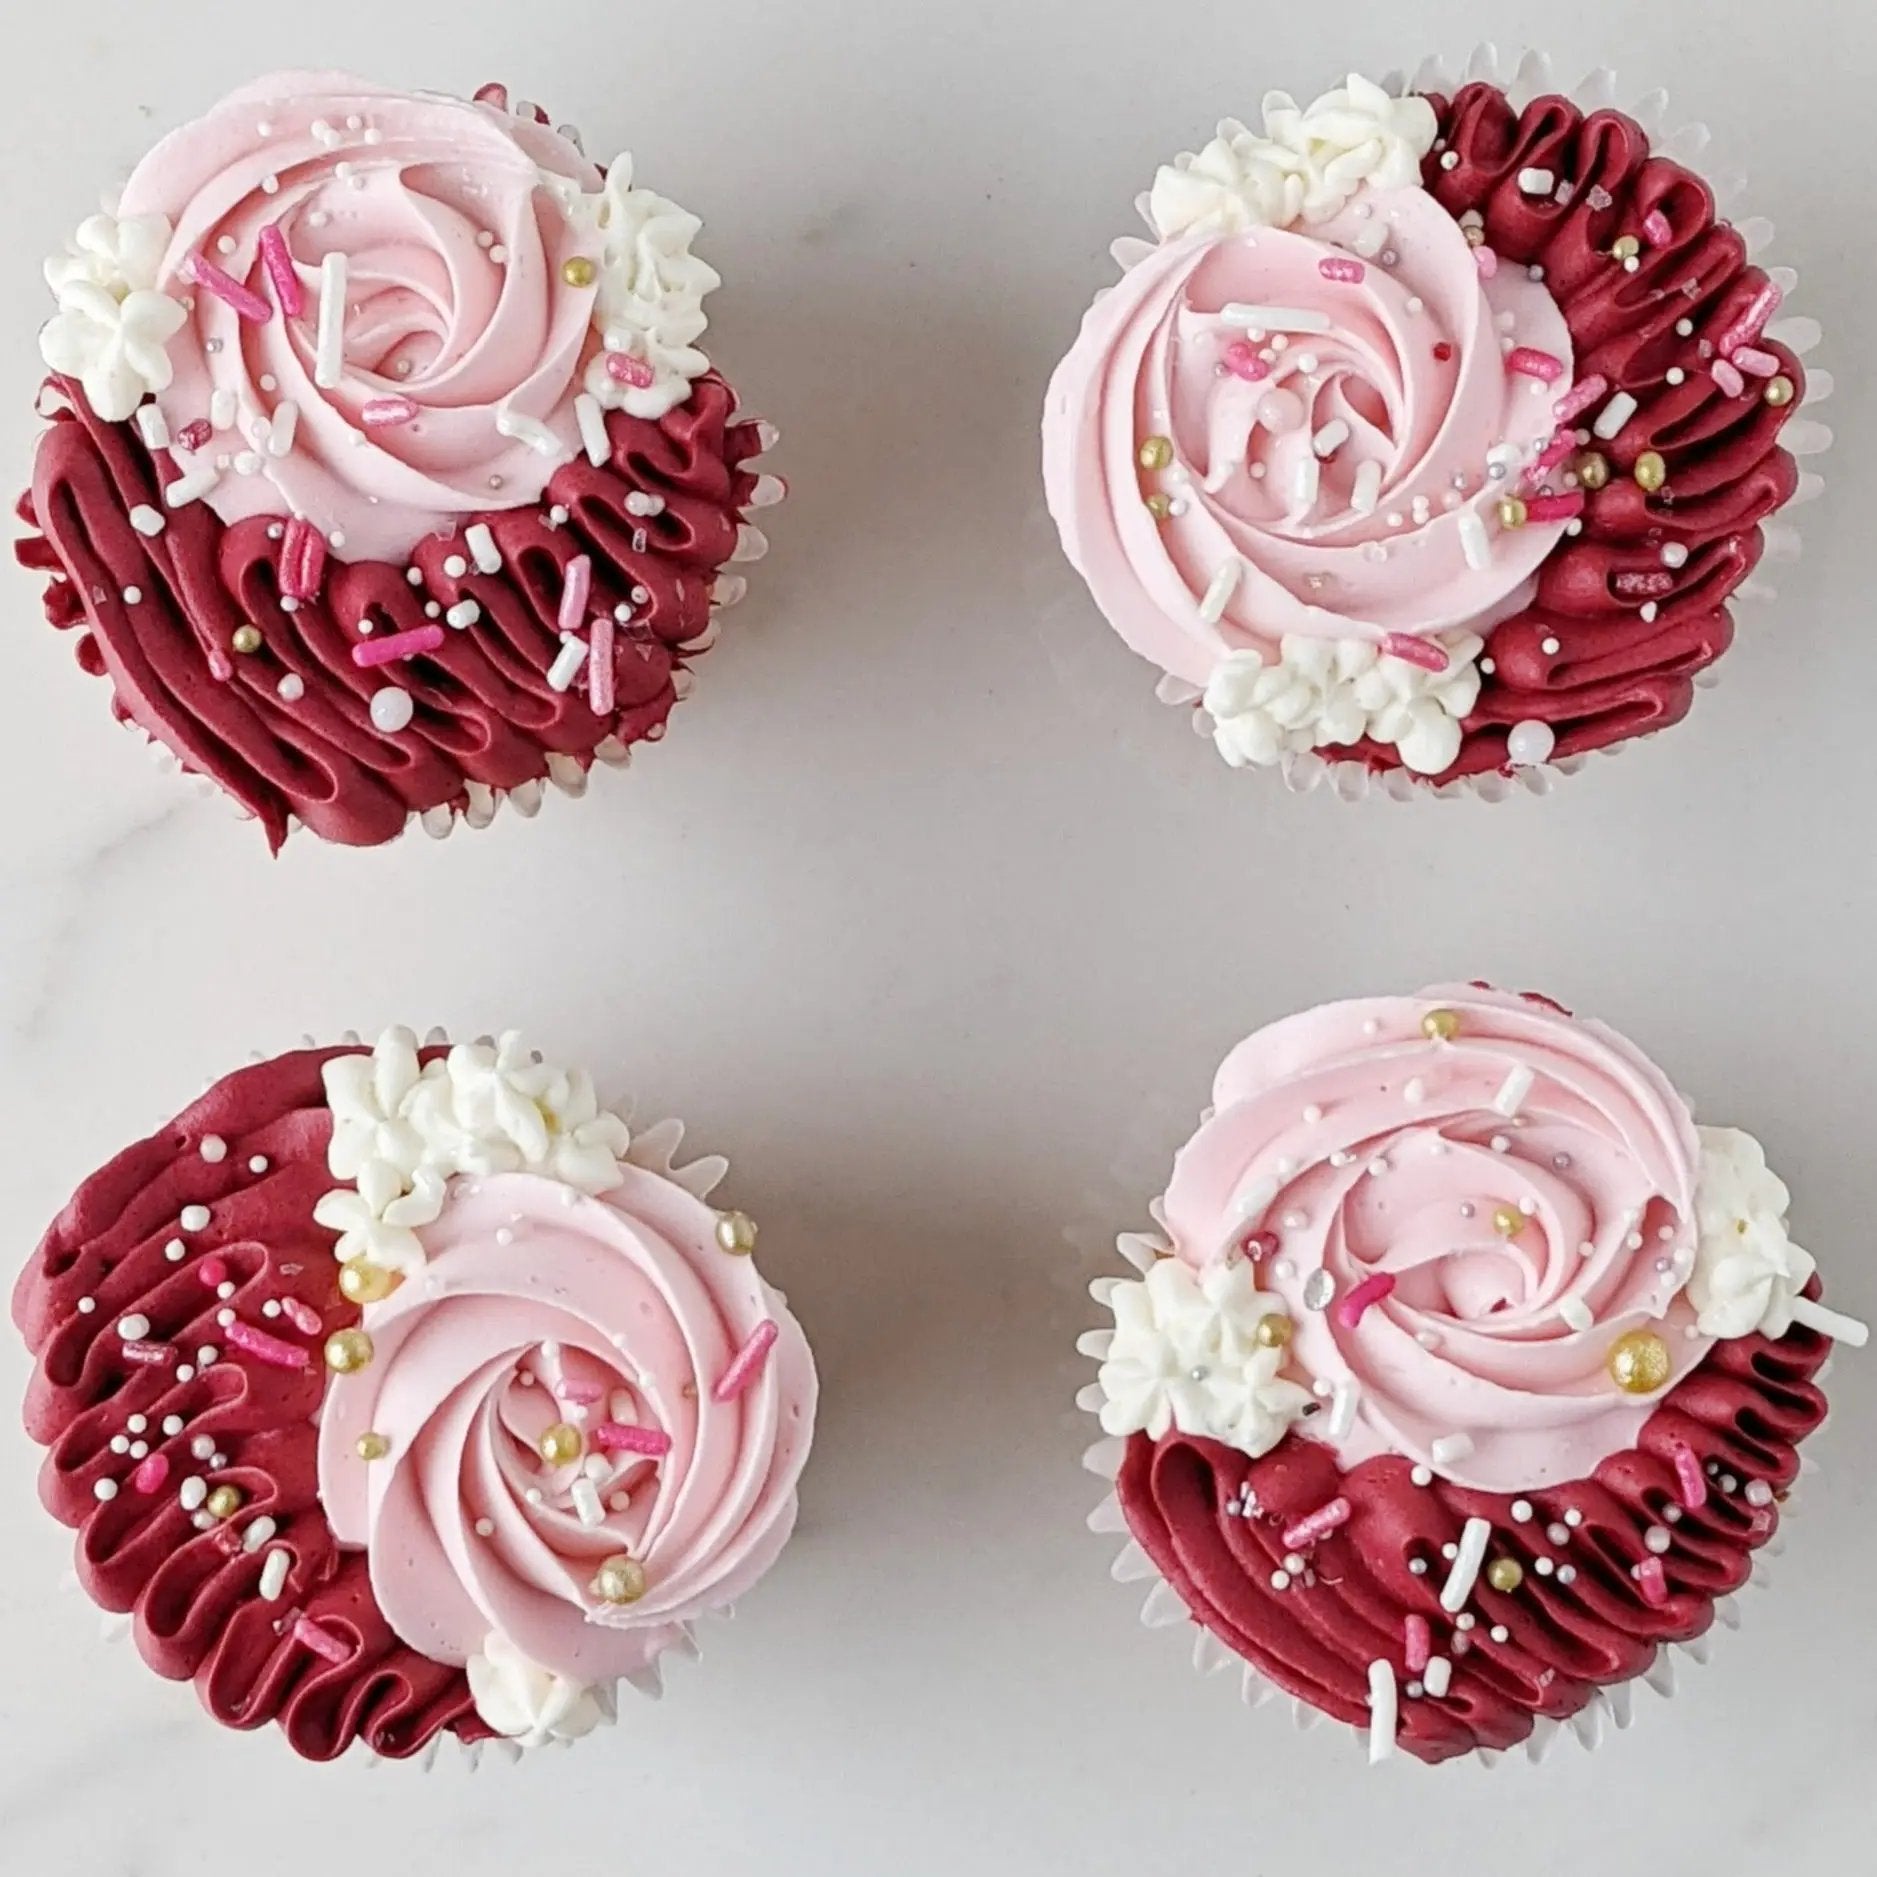 Buy Pretty in Pink Abstract Birthday Celebration Cupcakes | Celebrity Cake Studio